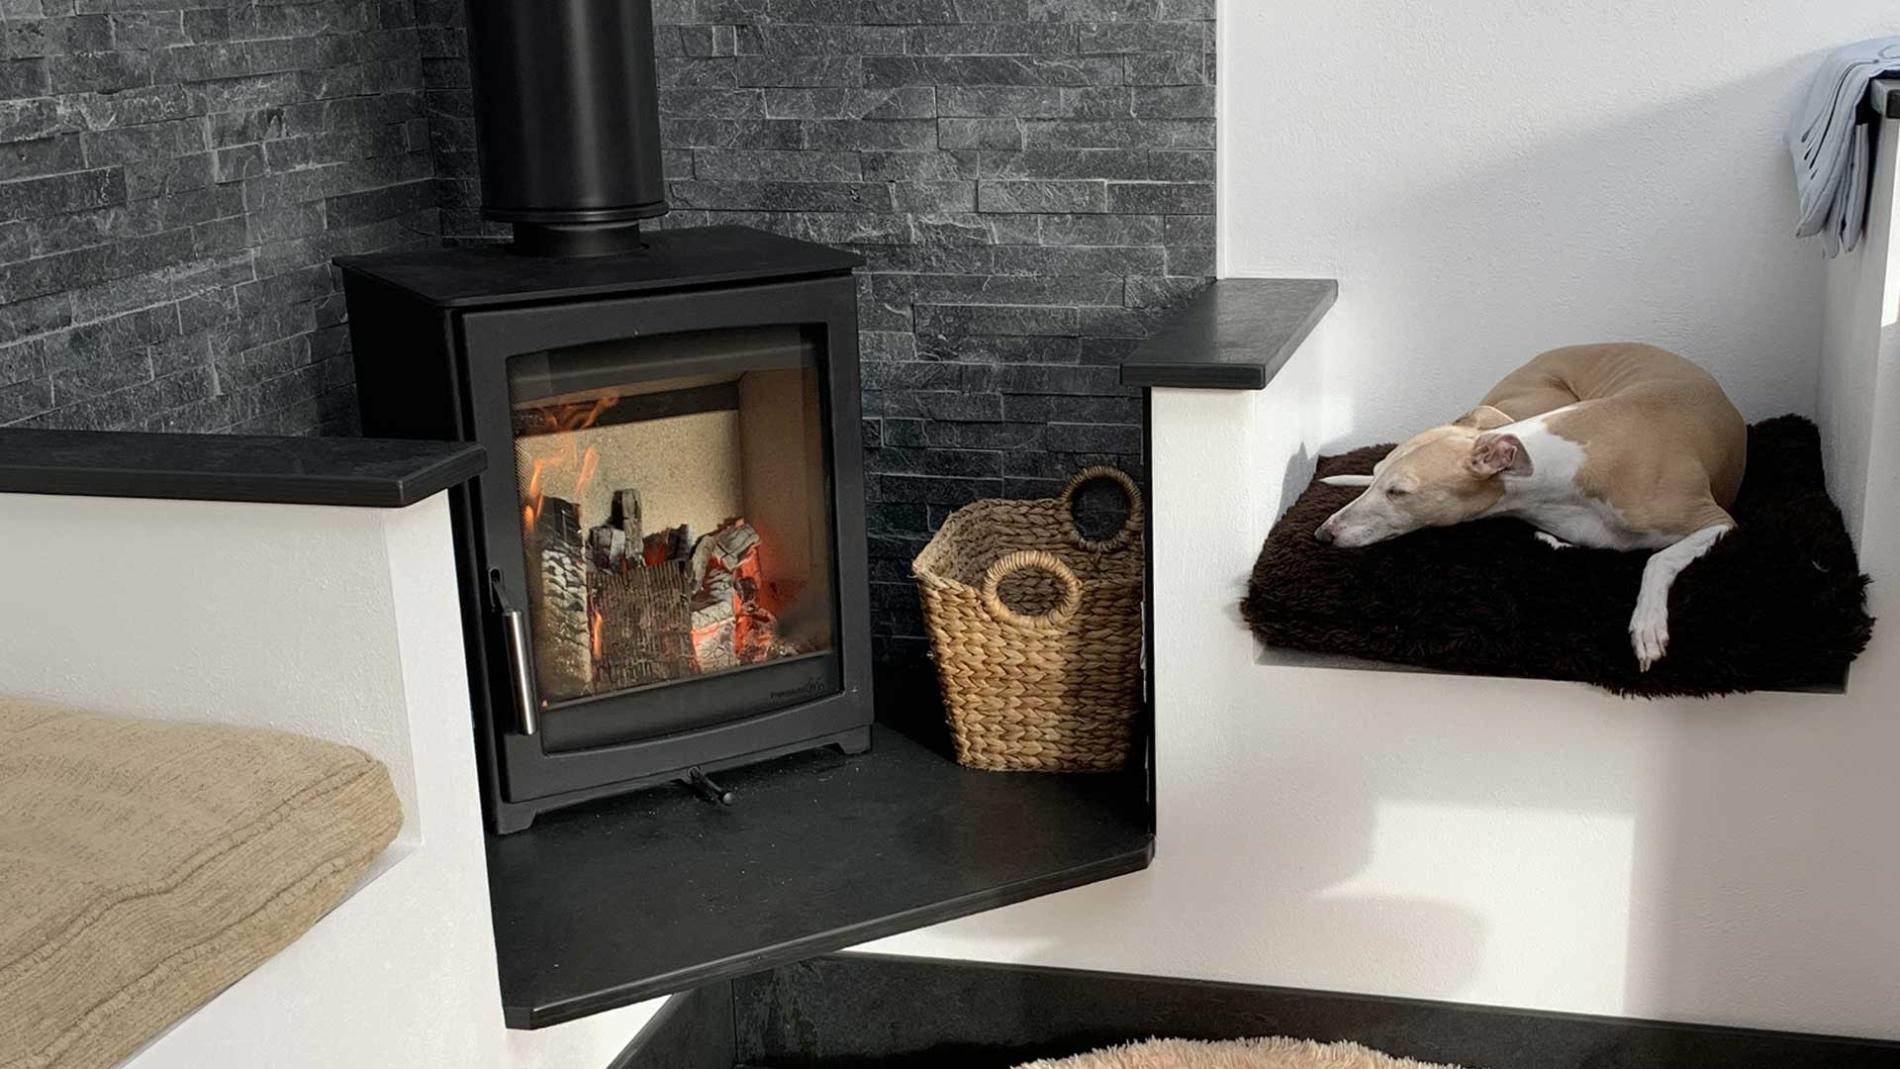 Dog Asleep Beside a Multi Fuel Burner with Slate Hearth, Wall and Cills